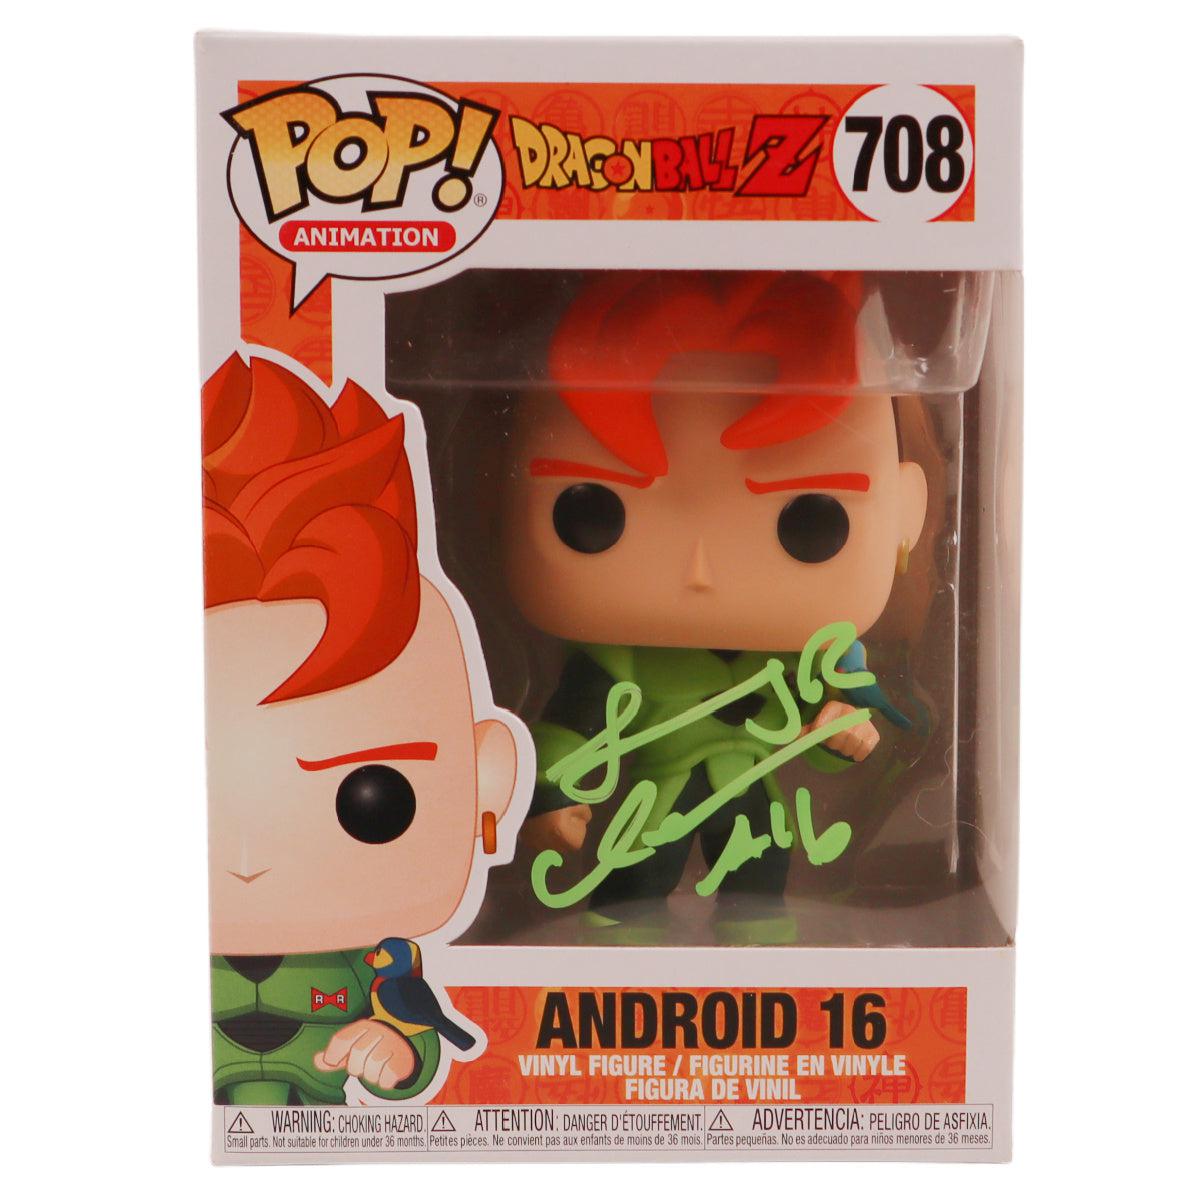 Jeremy Inman Signed Funko POP Dragon Ball Z Android 16 #708 Autographed JSA COA 2